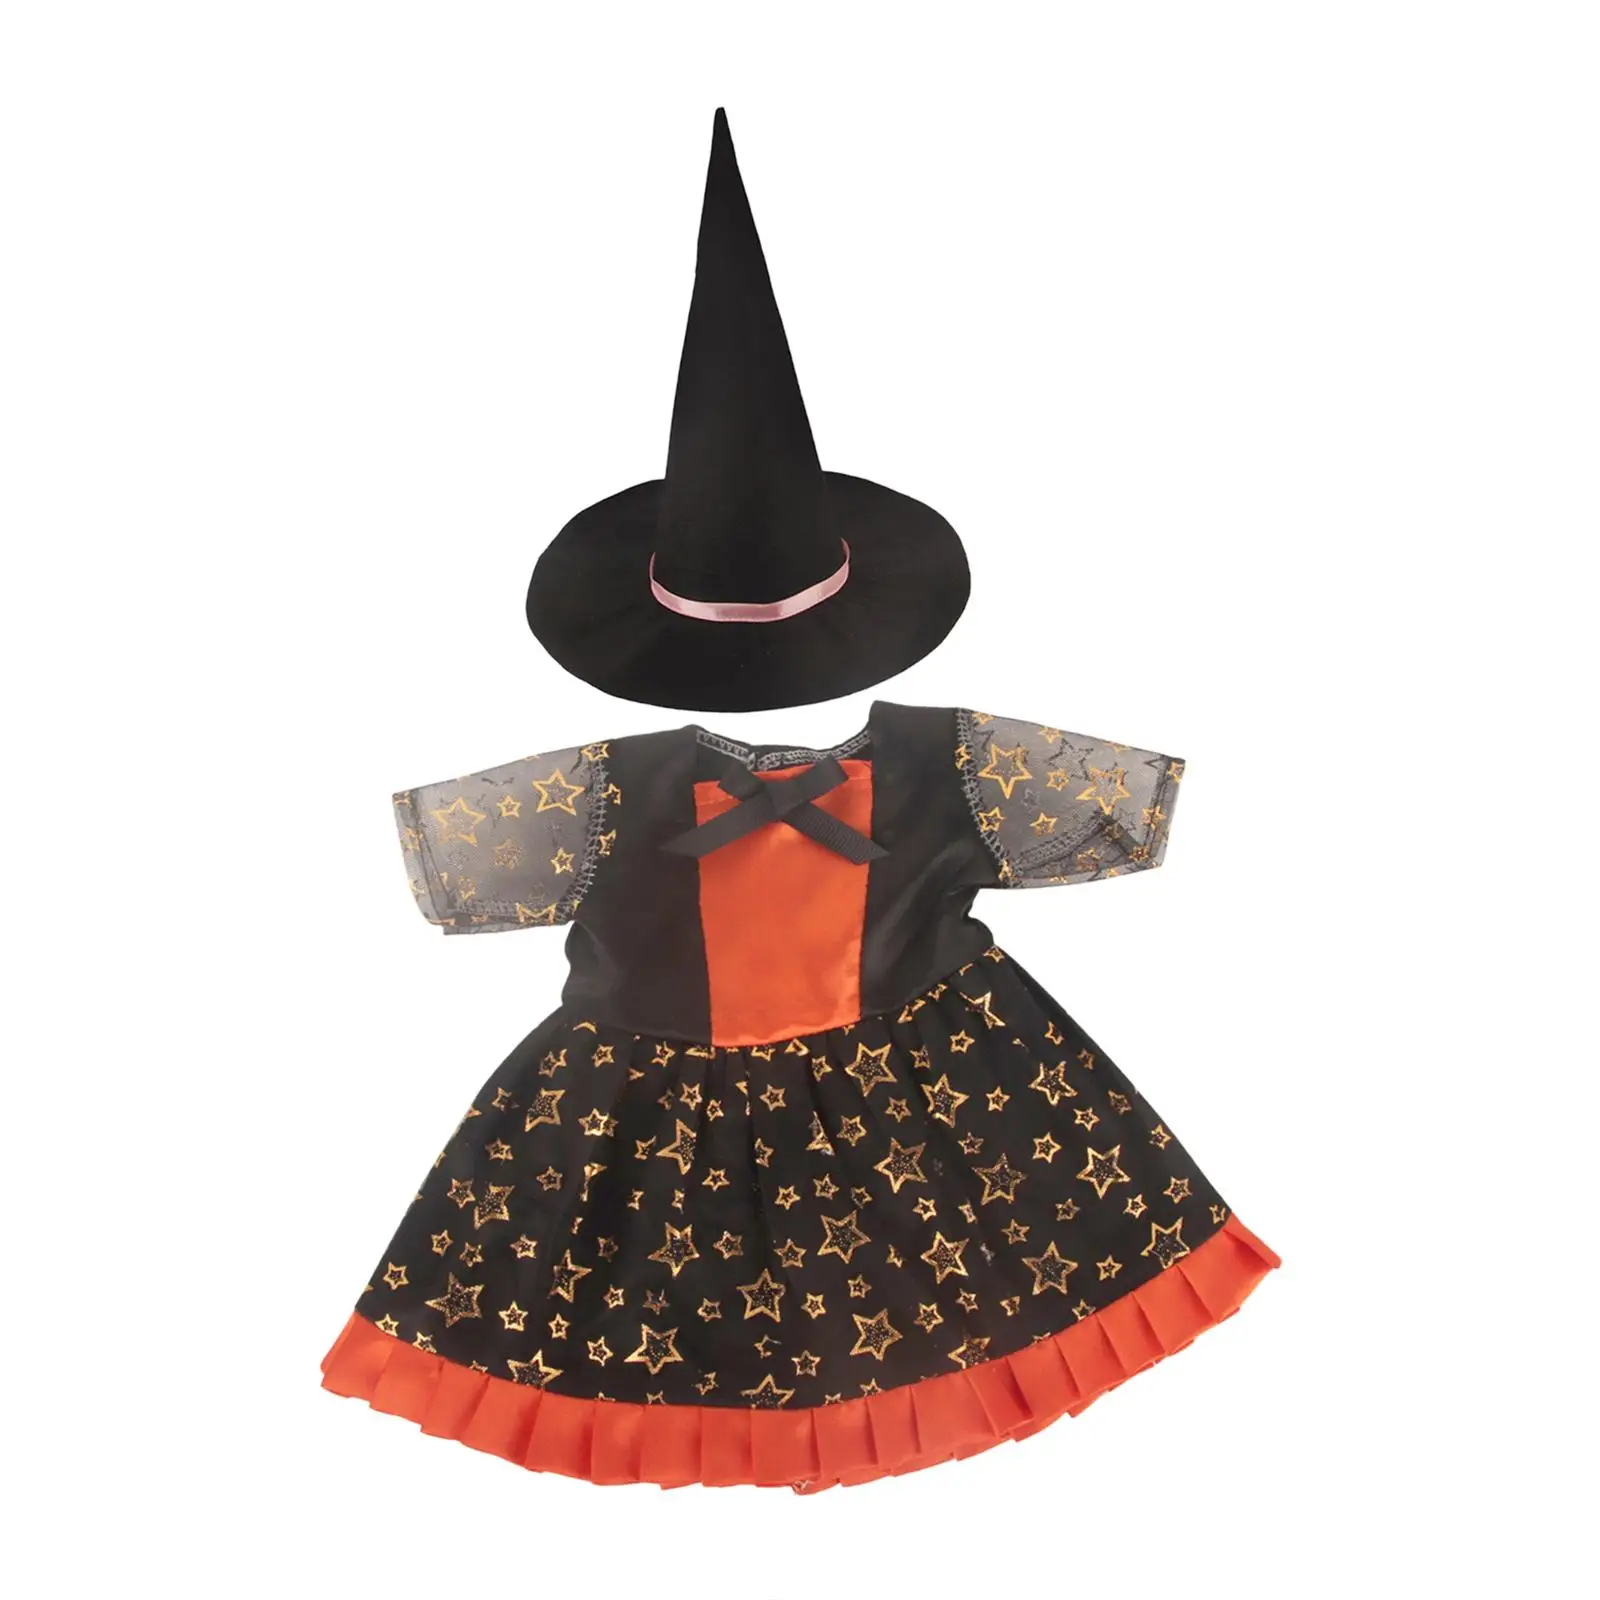 18 inch Girl Doll Dress Hat Outfit for Festival Activity Dress up Party